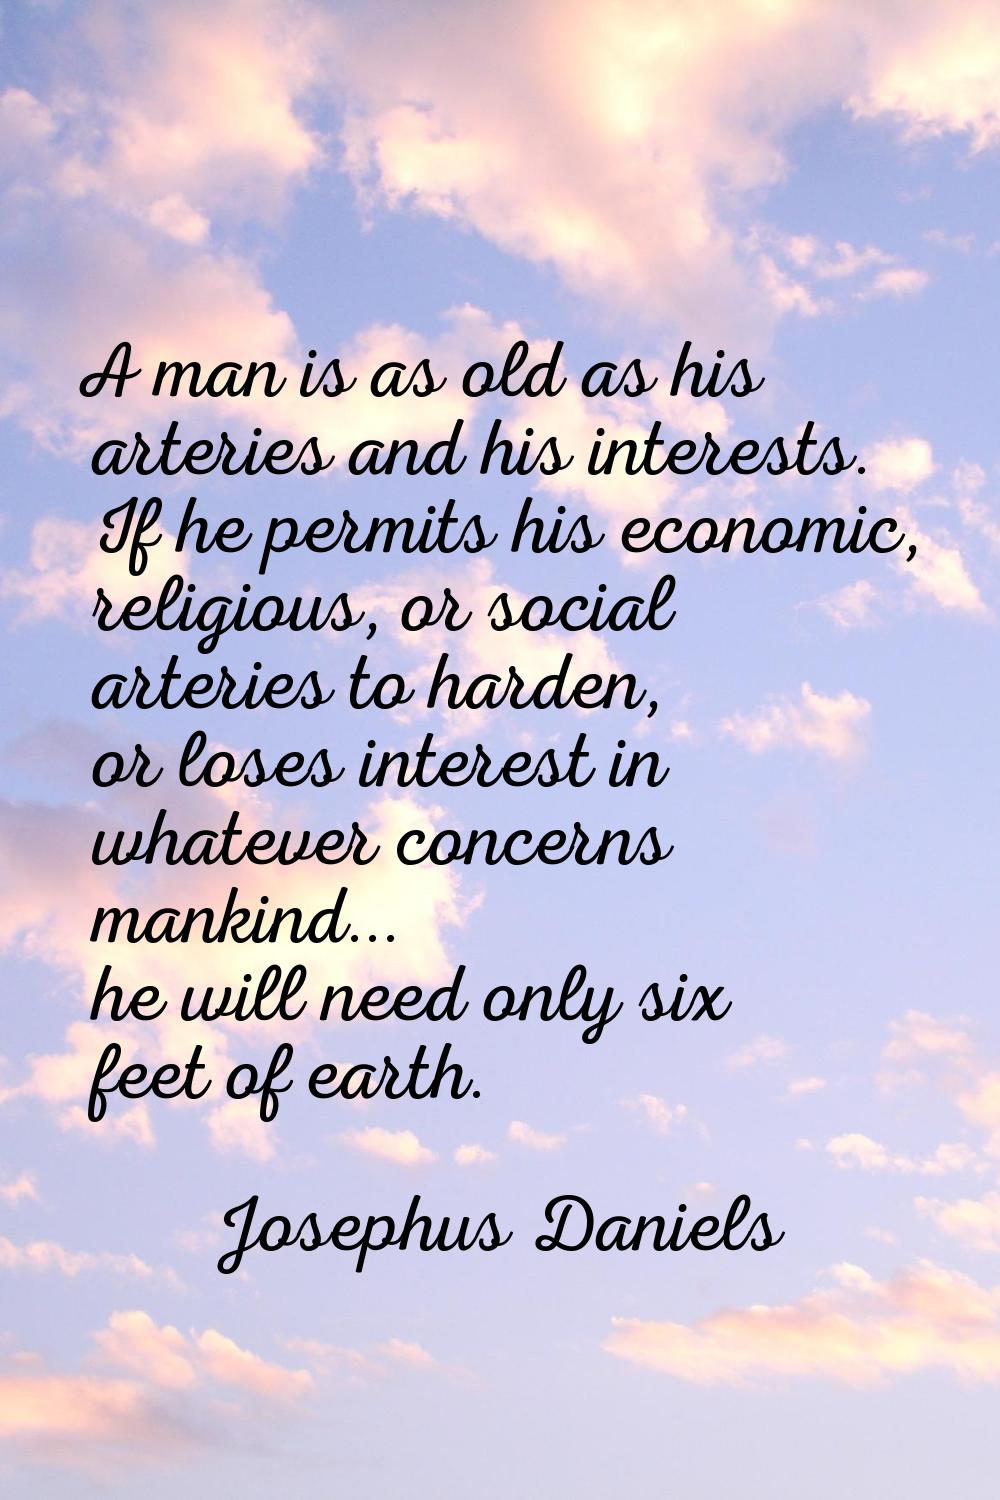 A man is as old as his arteries and his interests. If he permits his economic, religious, or social